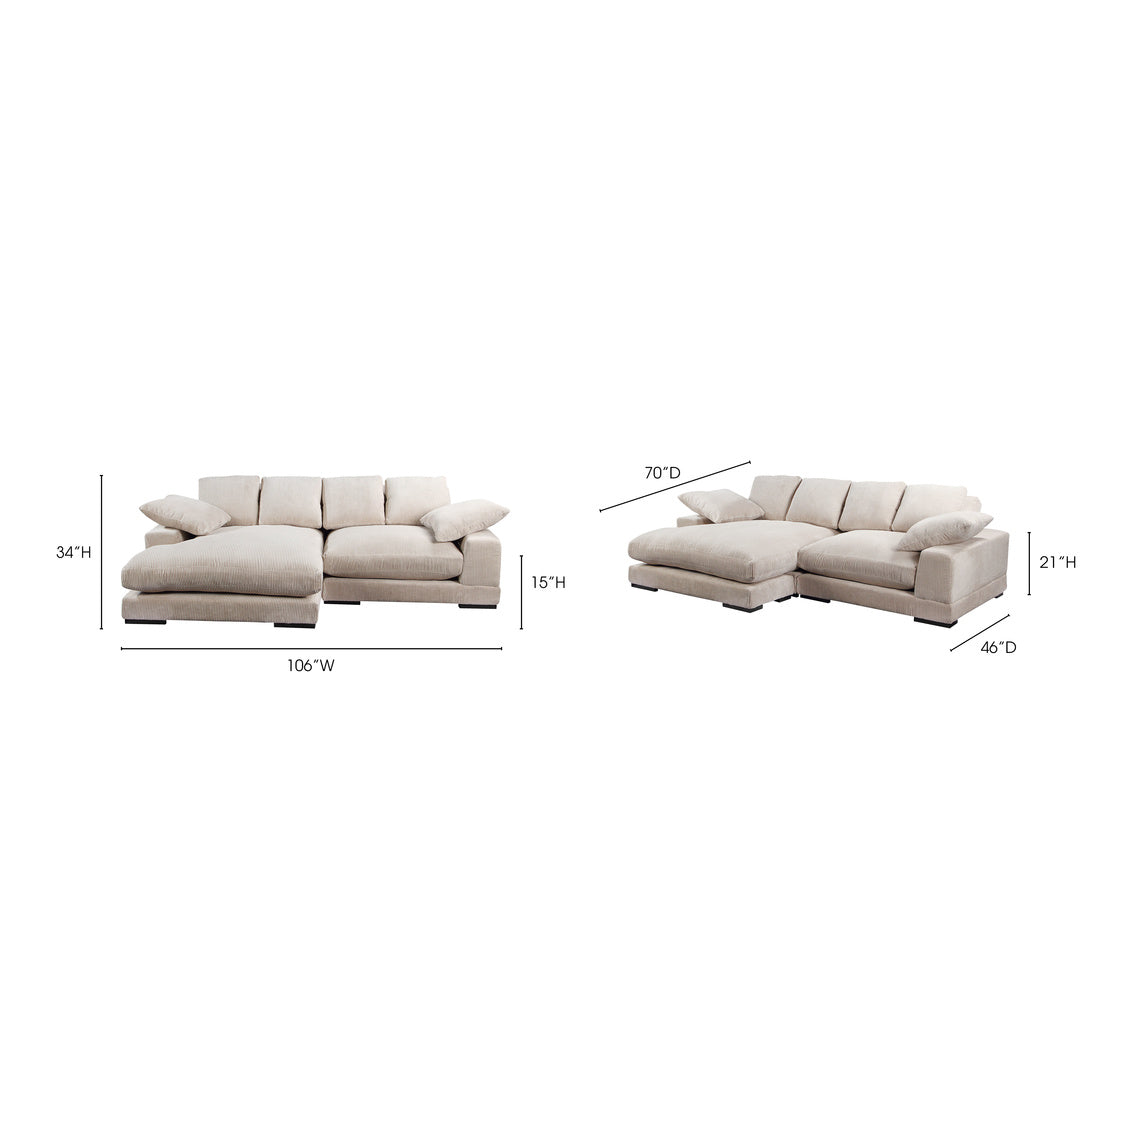 Plunge Sectional Cappuccino TN-1004-14